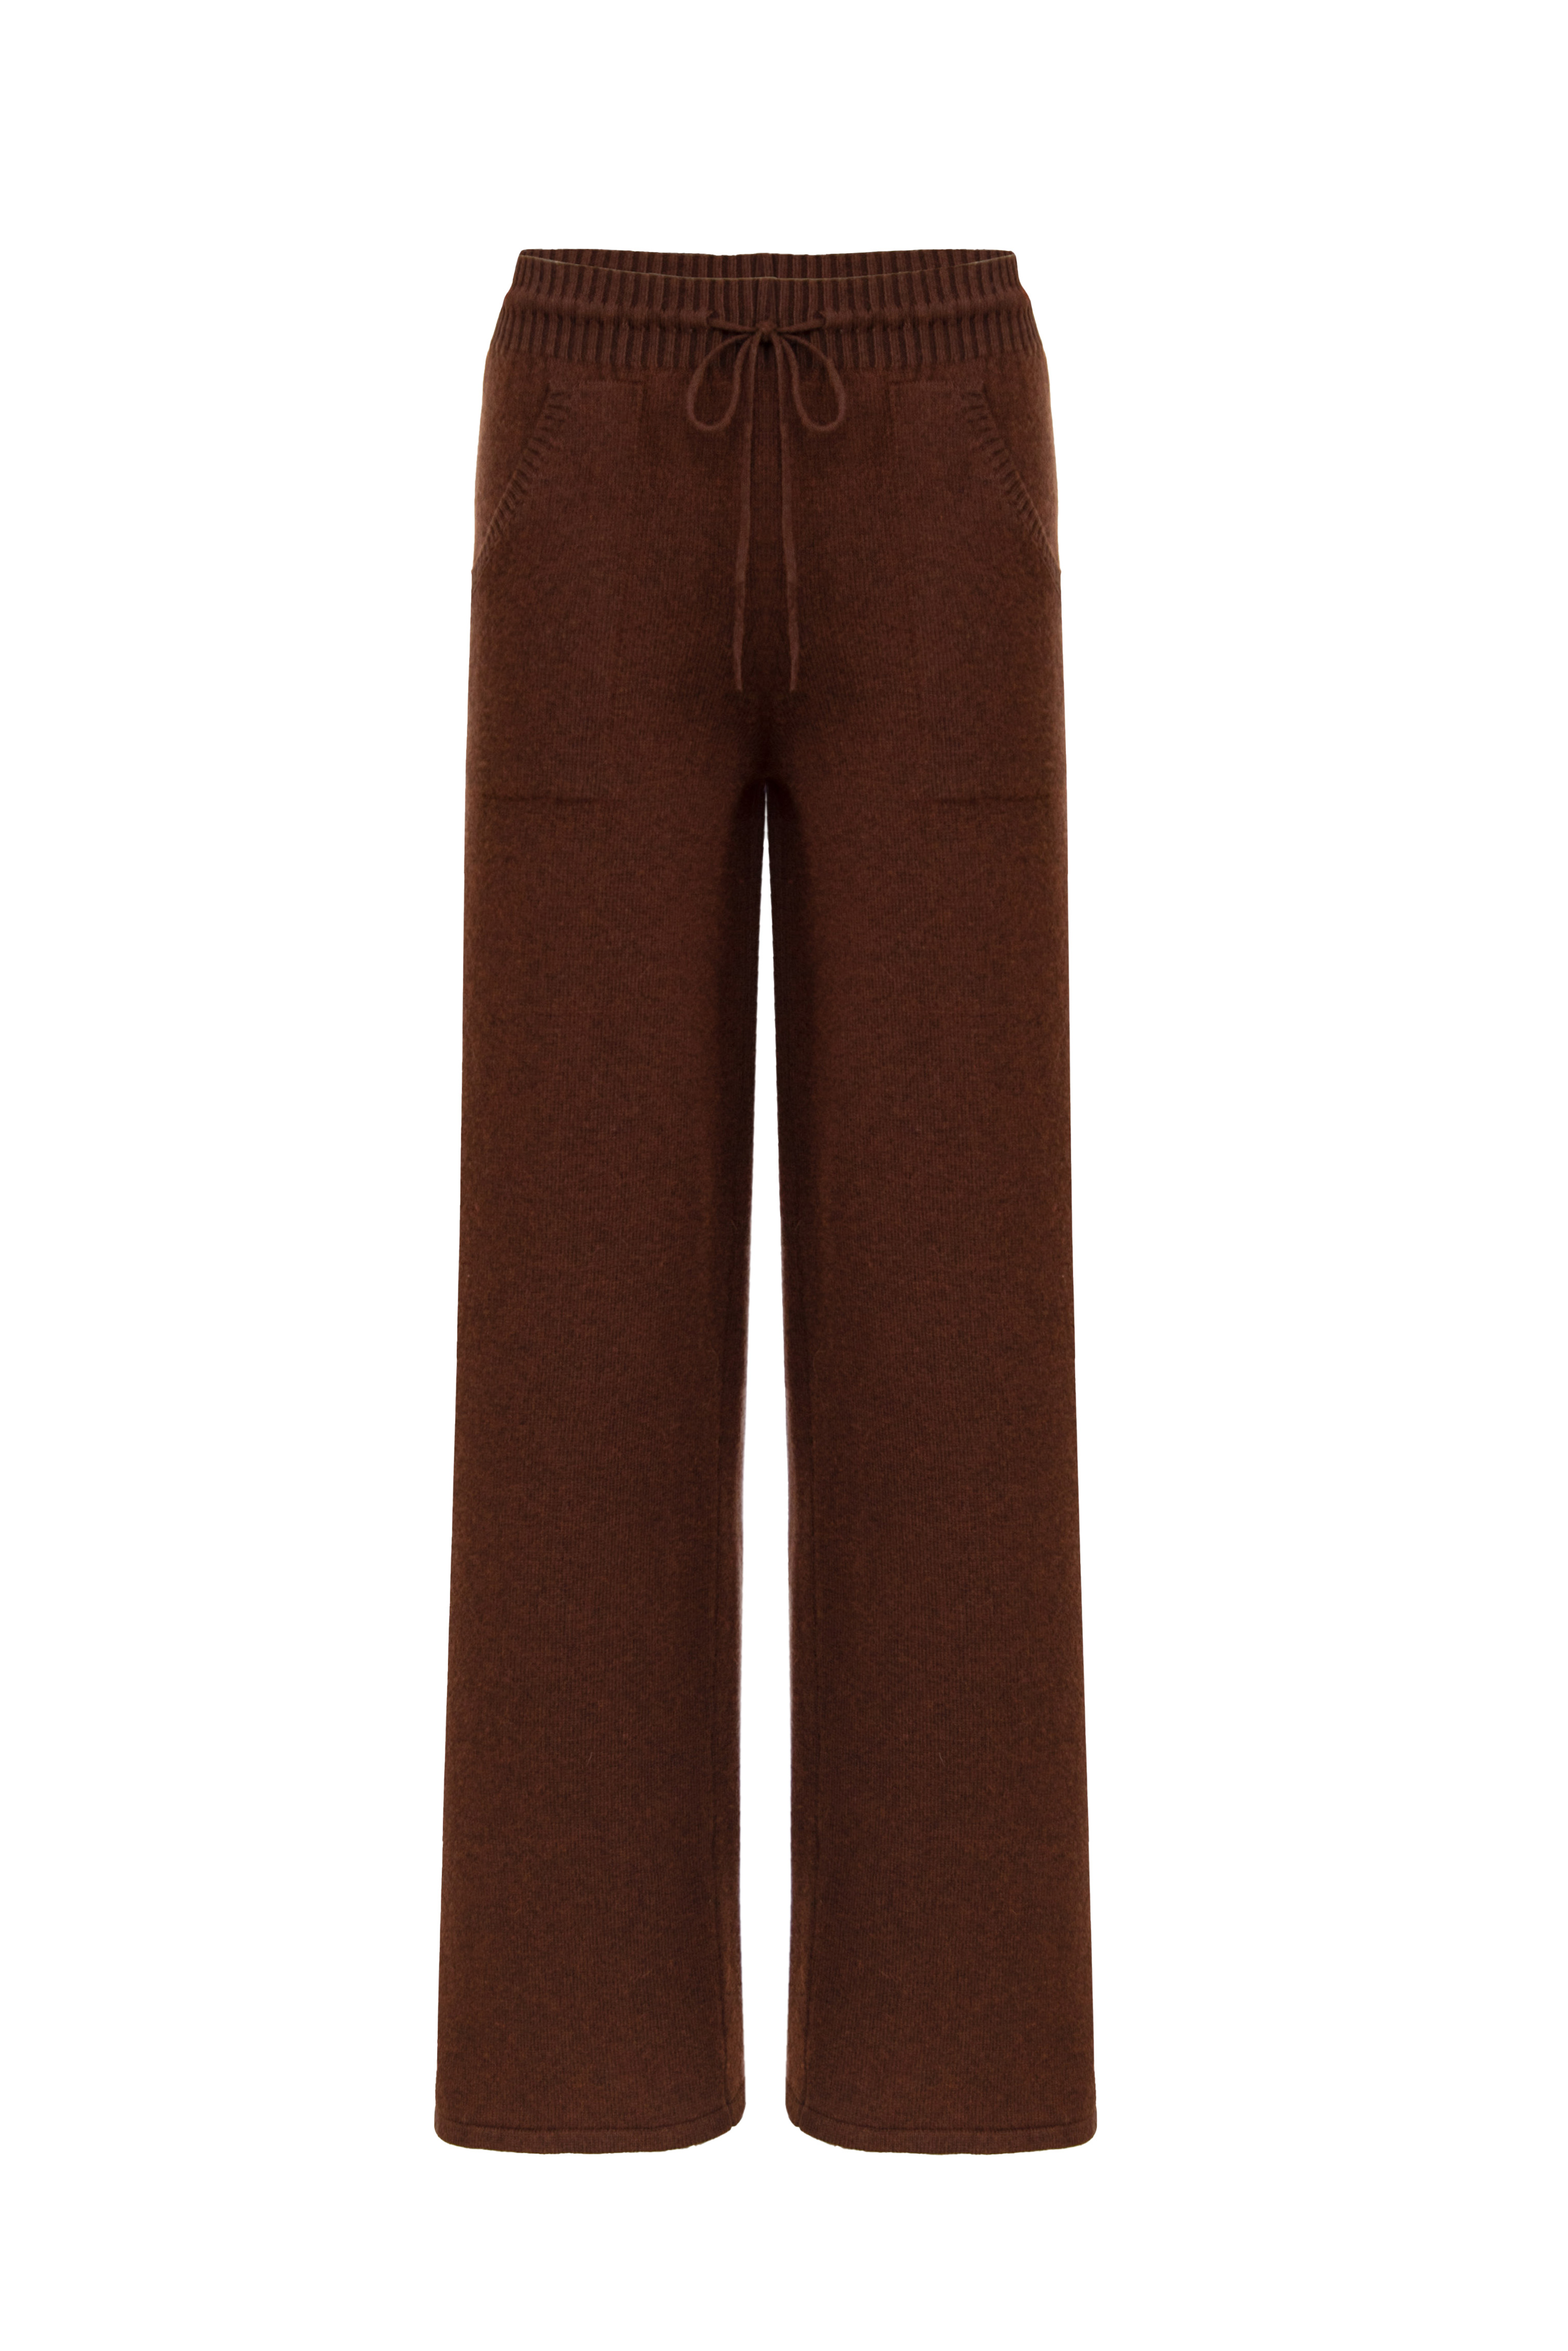 Trousers 4282-80 Chocolate from BRUSNiKA